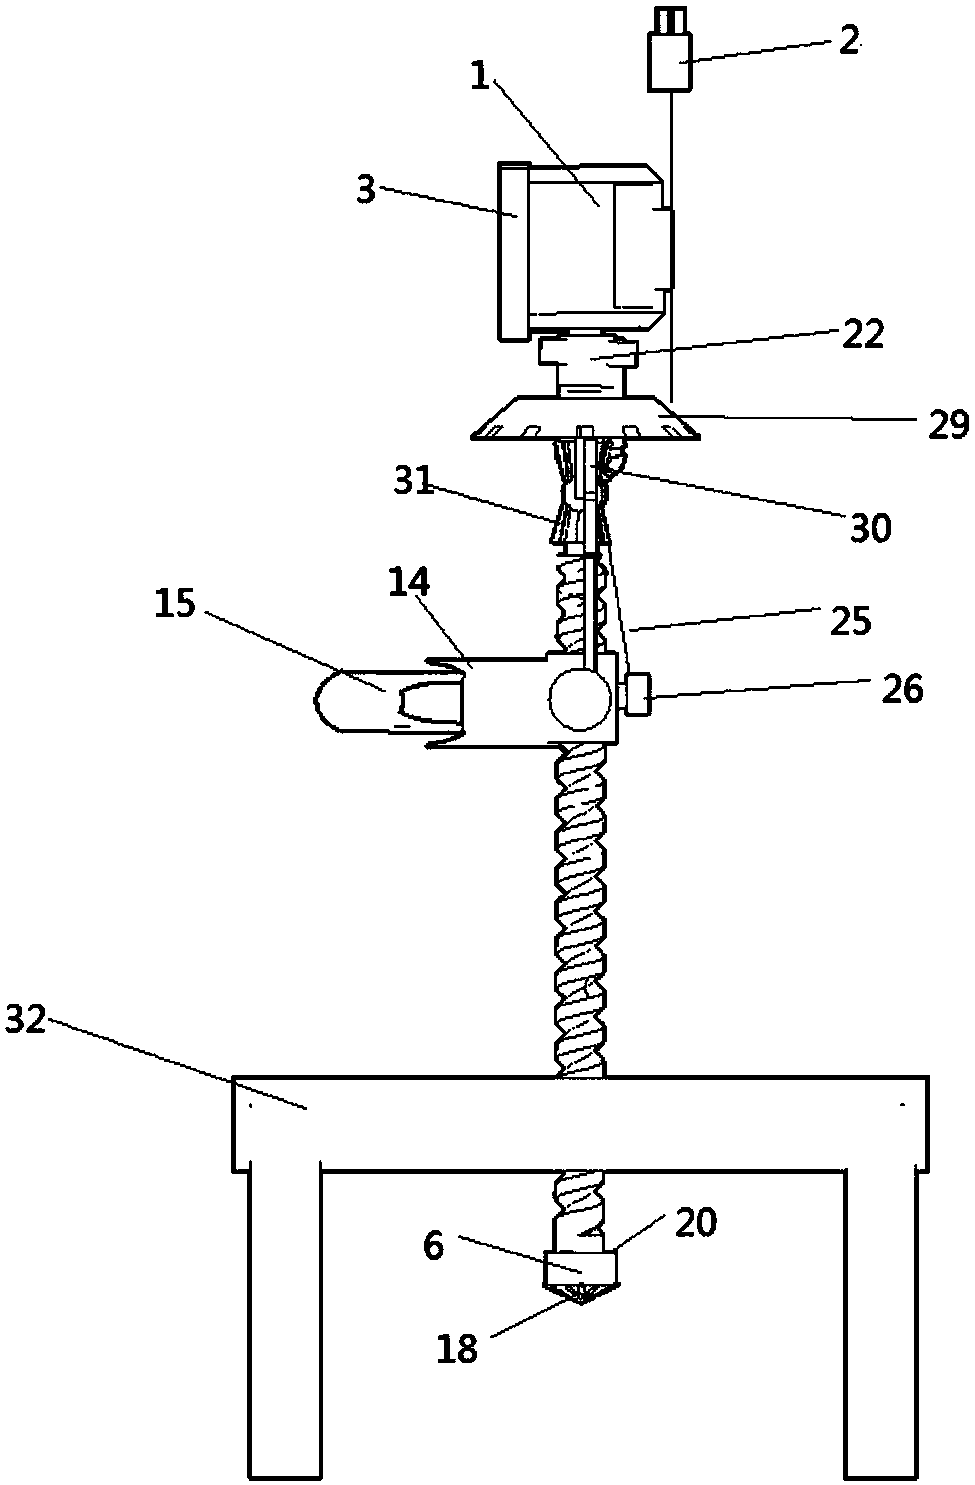 A PLC-based dual-spring rotary coconut meat digging device and its working method